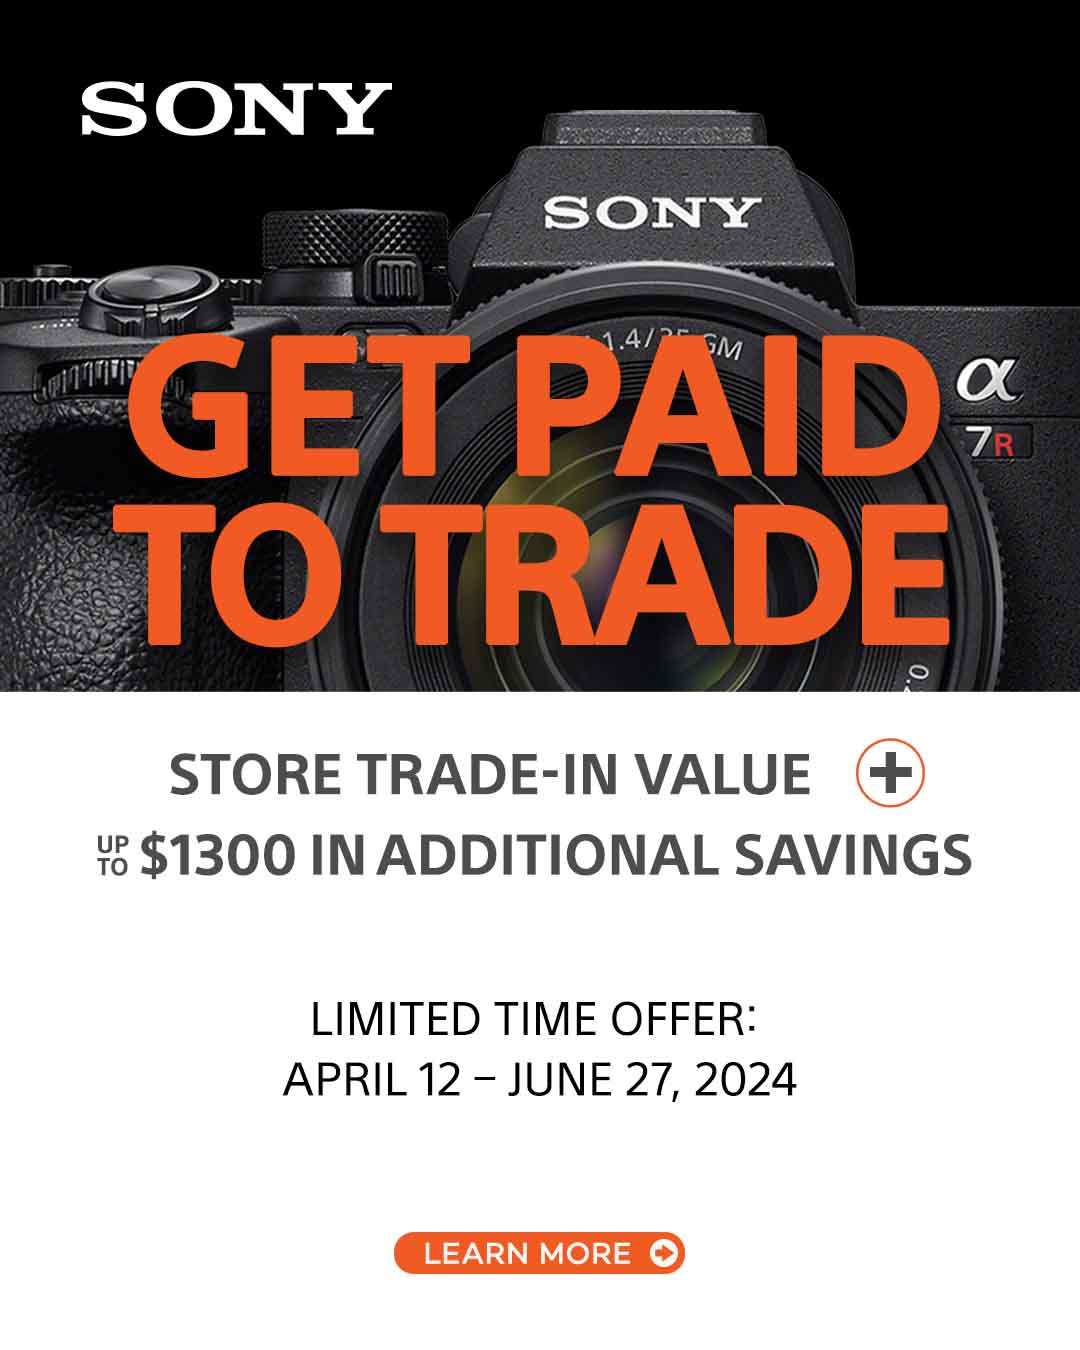 Get Paid to Trade with Sony - Sony Trade-in Trade-up Program